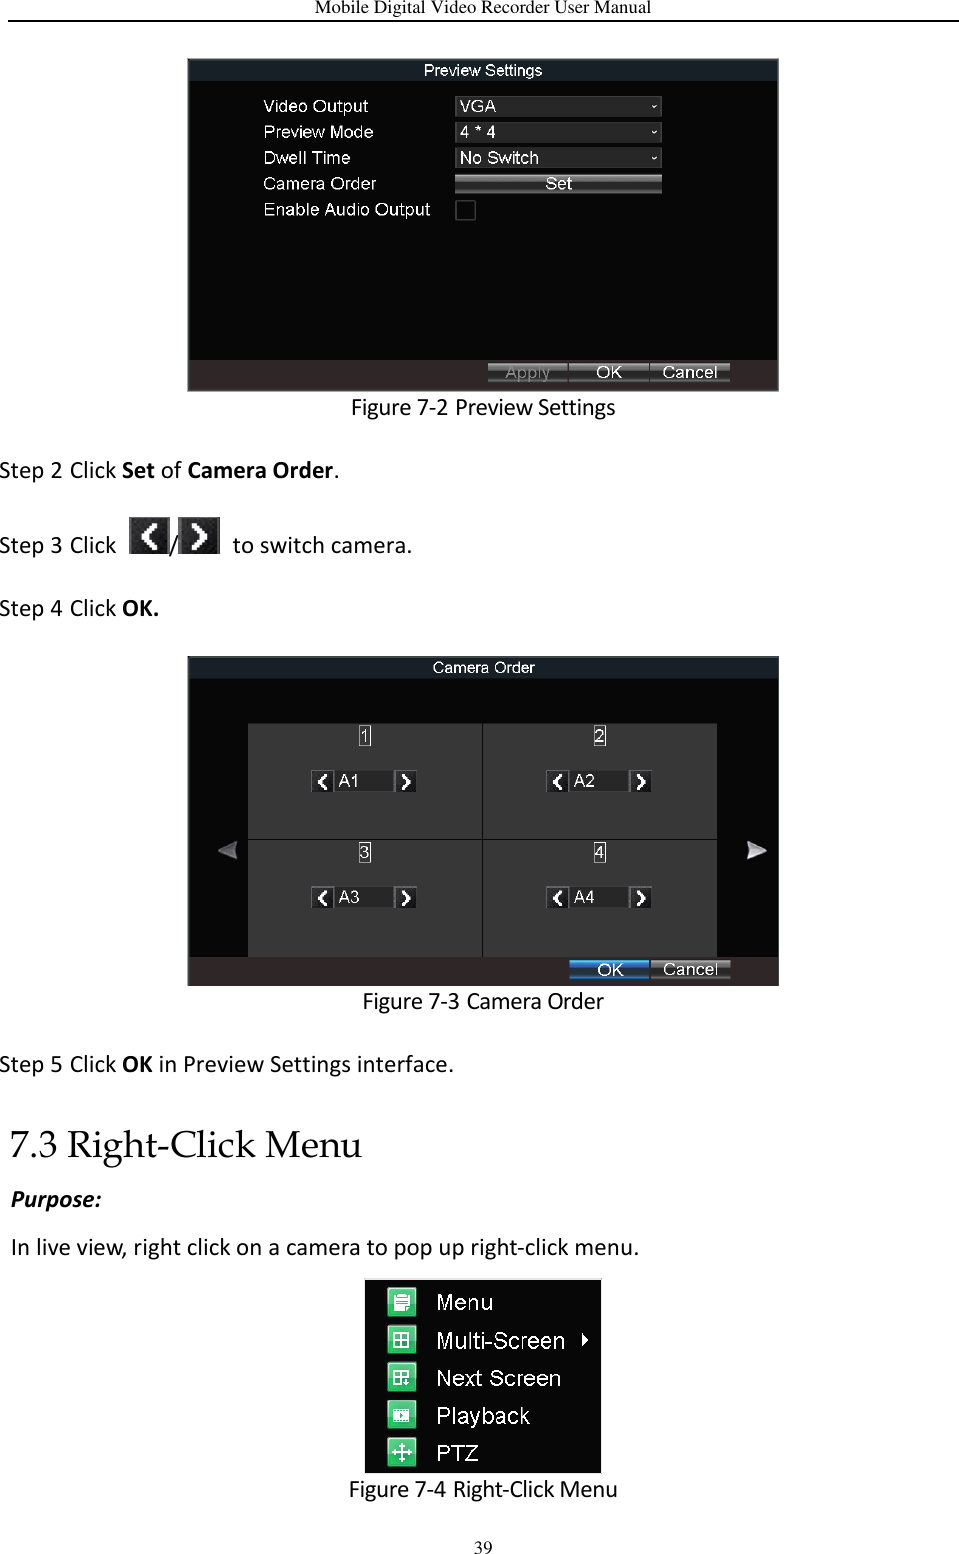 Mobile Digital Video Recorder User Manual 39  Figure 7-2 Preview Settings Step 2 Click Set of Camera Order. Step 3 Click  /   to switch camera. Step 4 Click OK.  Figure 7-3 Camera Order Step 5 Click OK in Preview Settings interface. 7.3 Right-Click Menu Purpose: In live view, right click on a camera to pop up right-click menu.  Figure 7-4 Right-Click Menu 